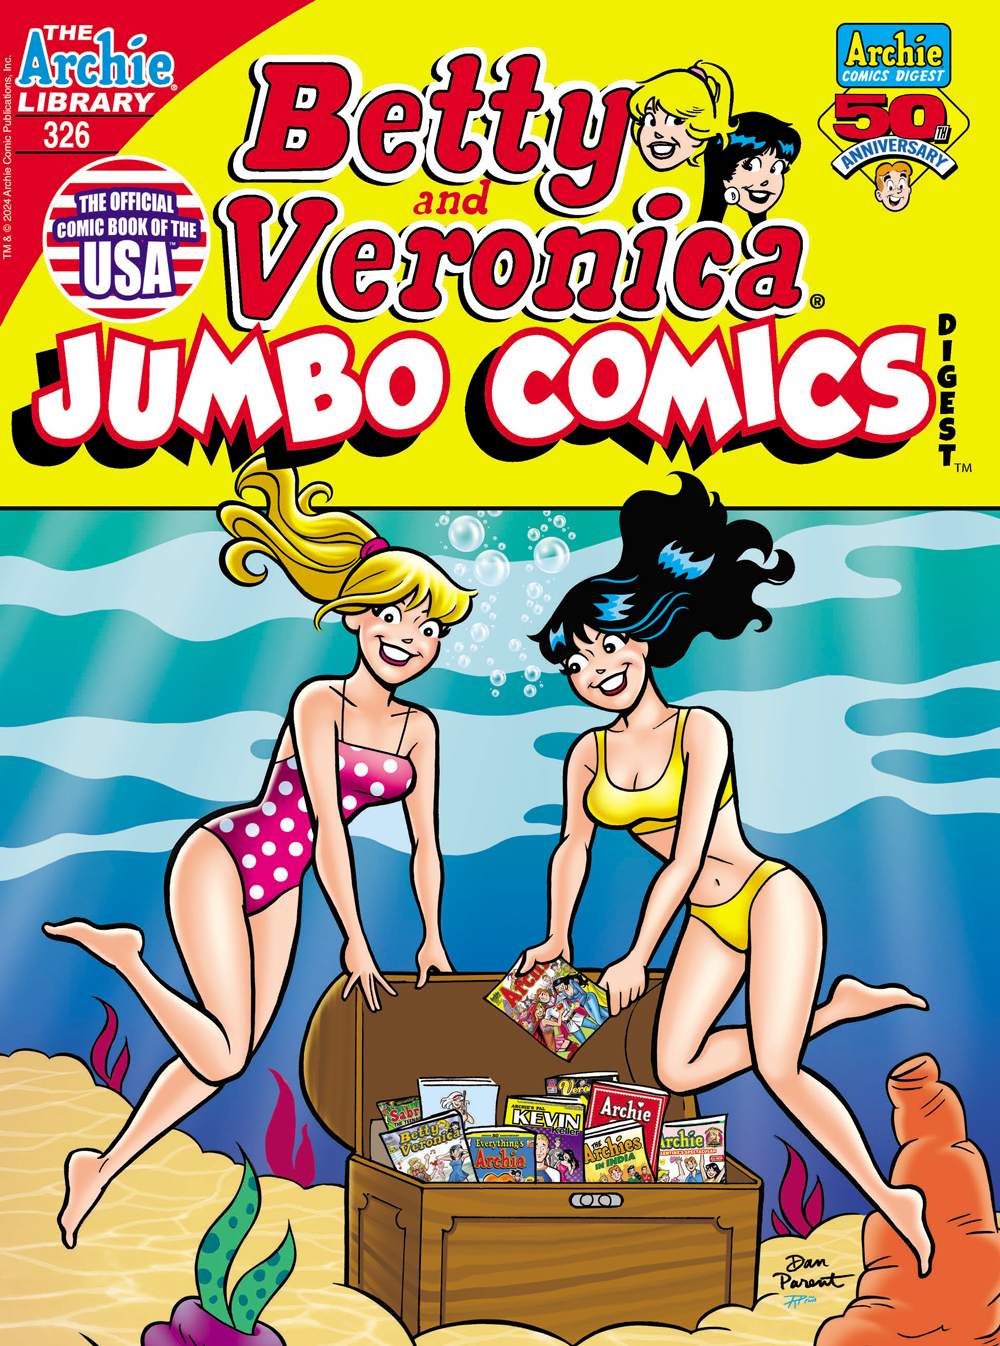 Betty and Veronica, in swimsuits, are floating underwater in the ocean, opening a sunken treasure chest. Inside the chest are a bunch of Archie comics, digests, and graphic novels.